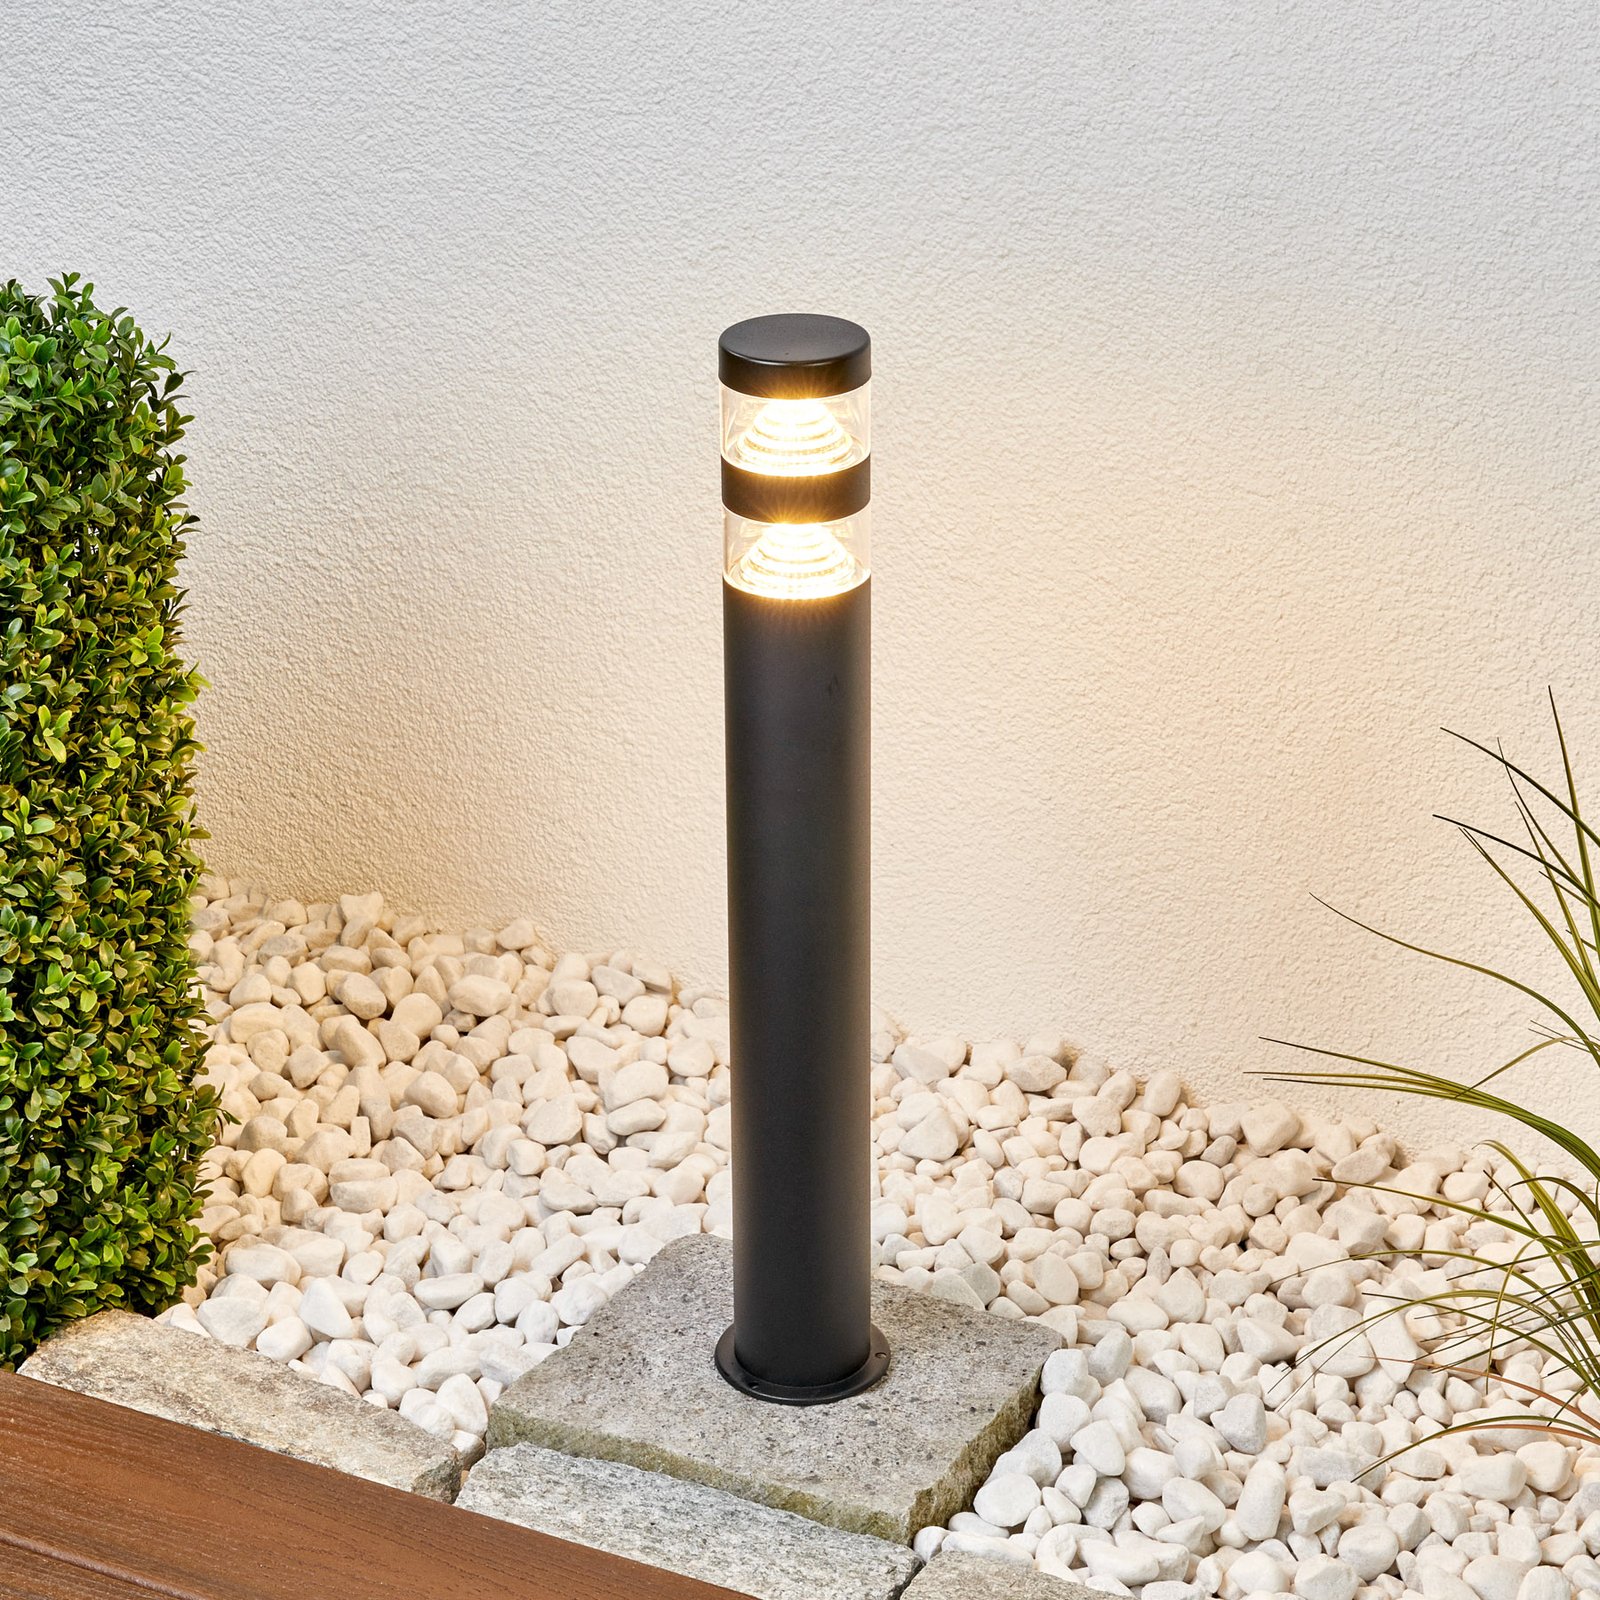 Lanea stainless steel path light with LEDs